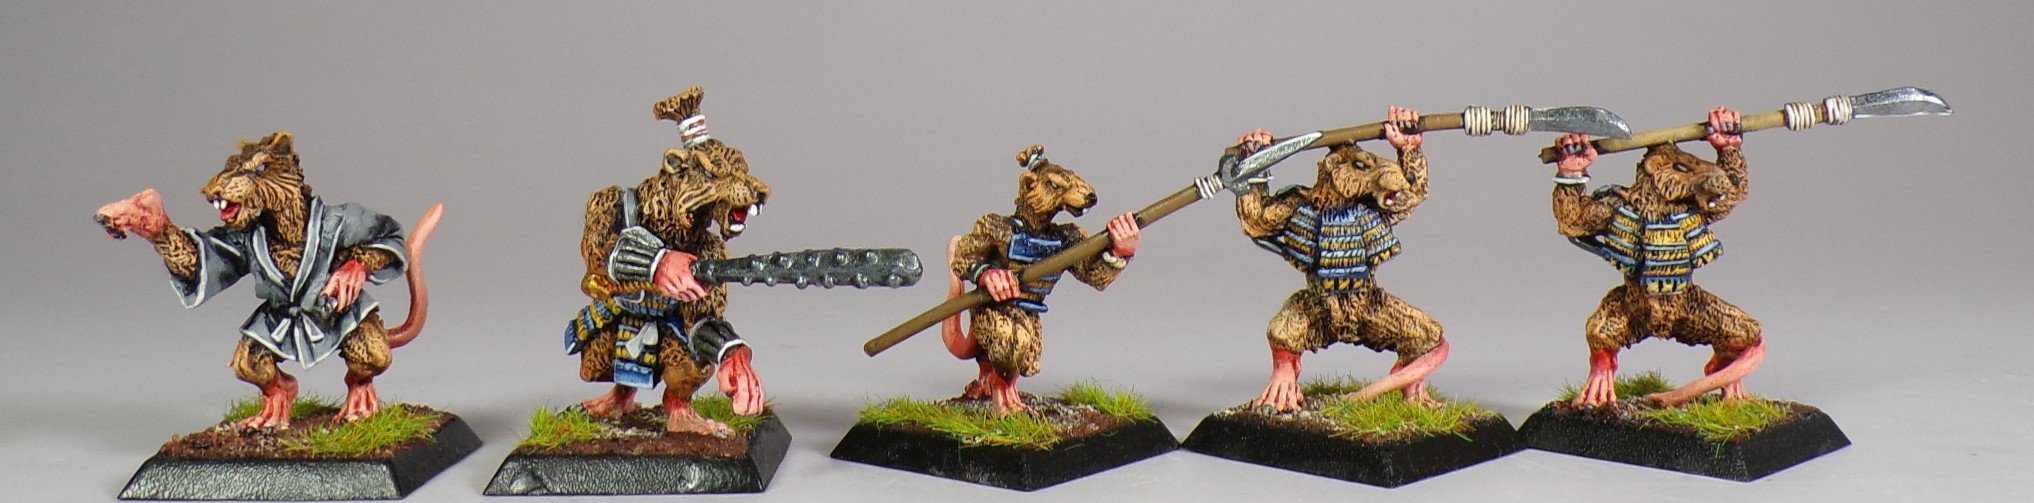 L5R Legend of the Five Rings Miniature Painting Service Paintedfigs (31).jpg